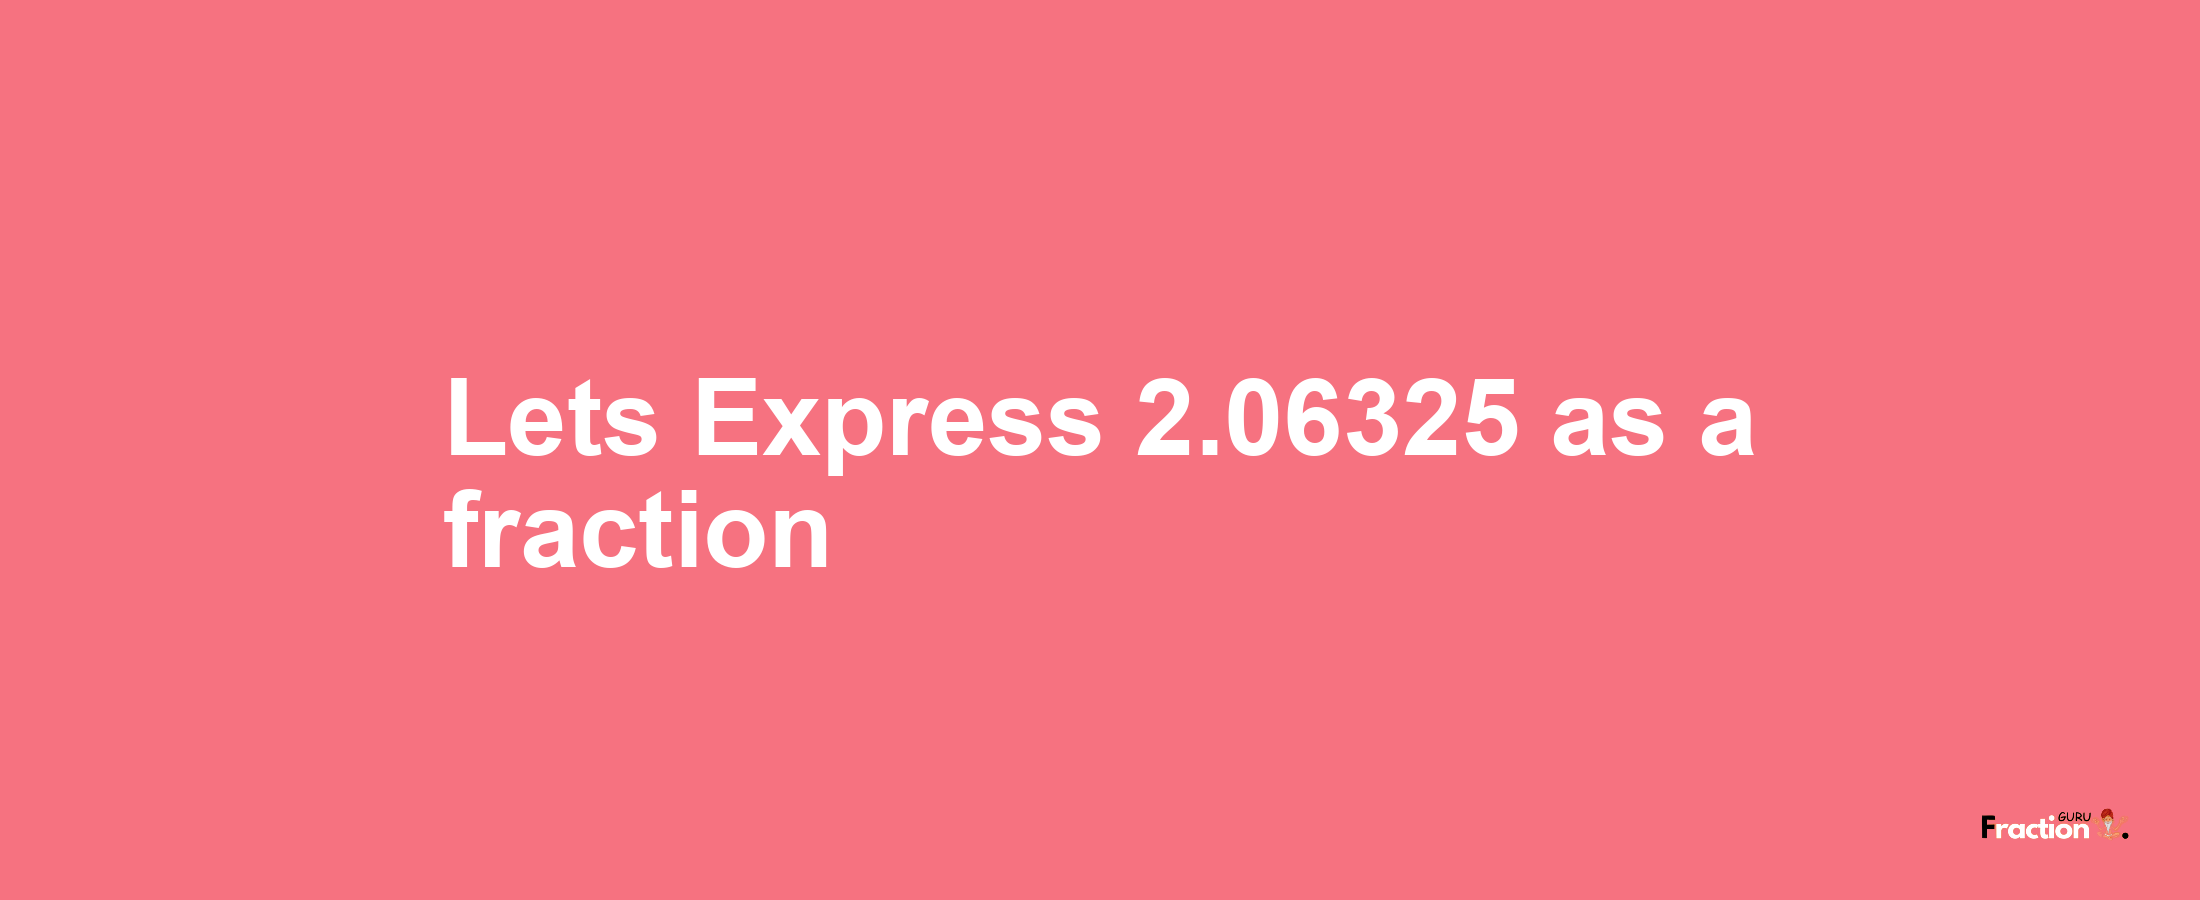 Lets Express 2.06325 as afraction